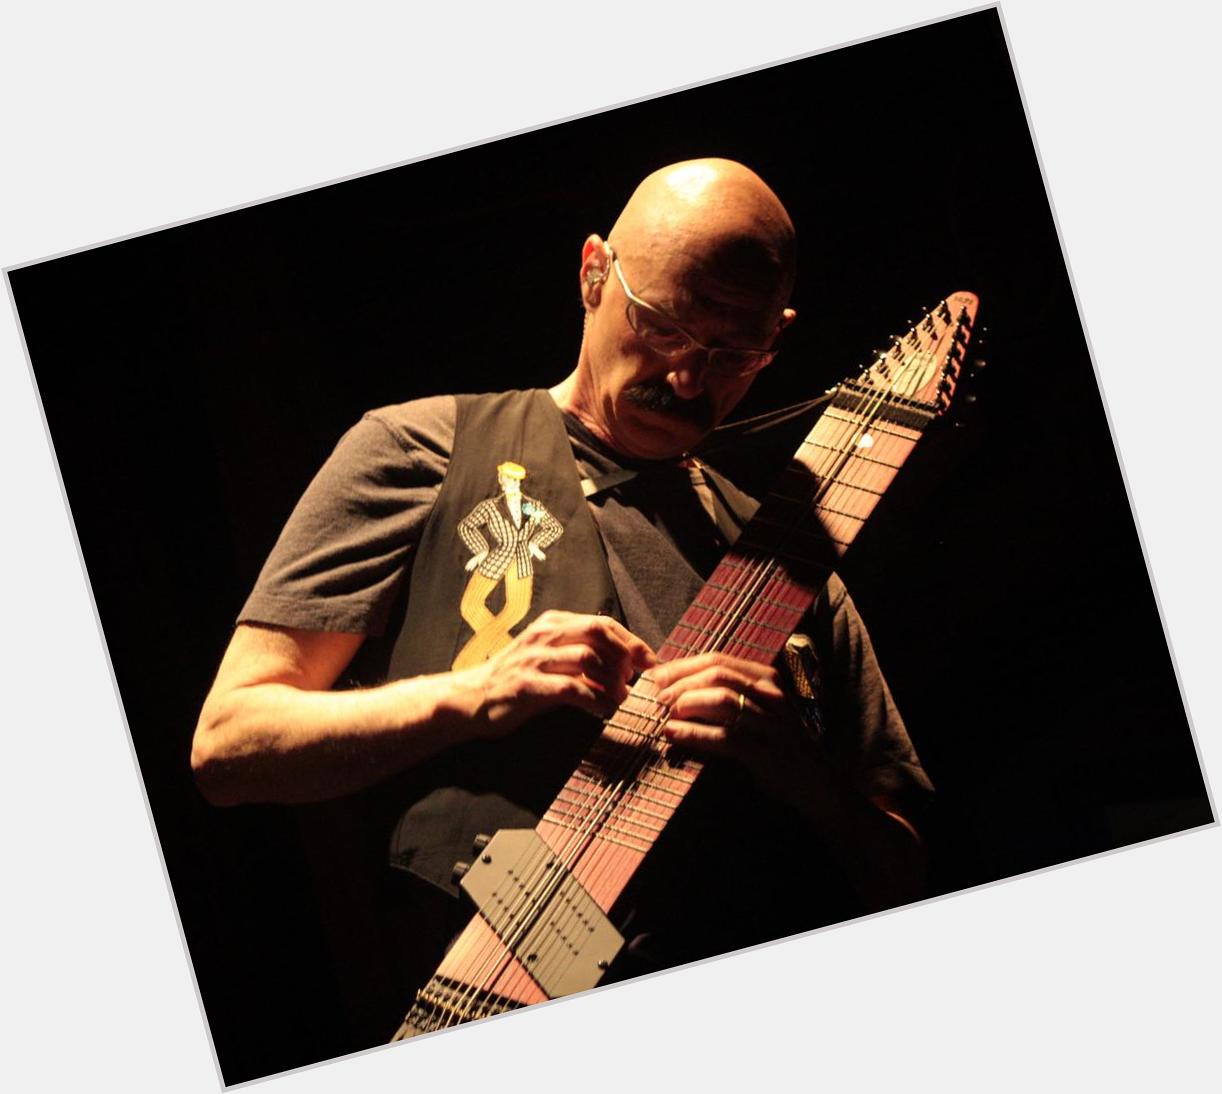 TONY LEVIN virtuous player  turn today 69, HAPPY BIRTHDAY & thank for innovating 